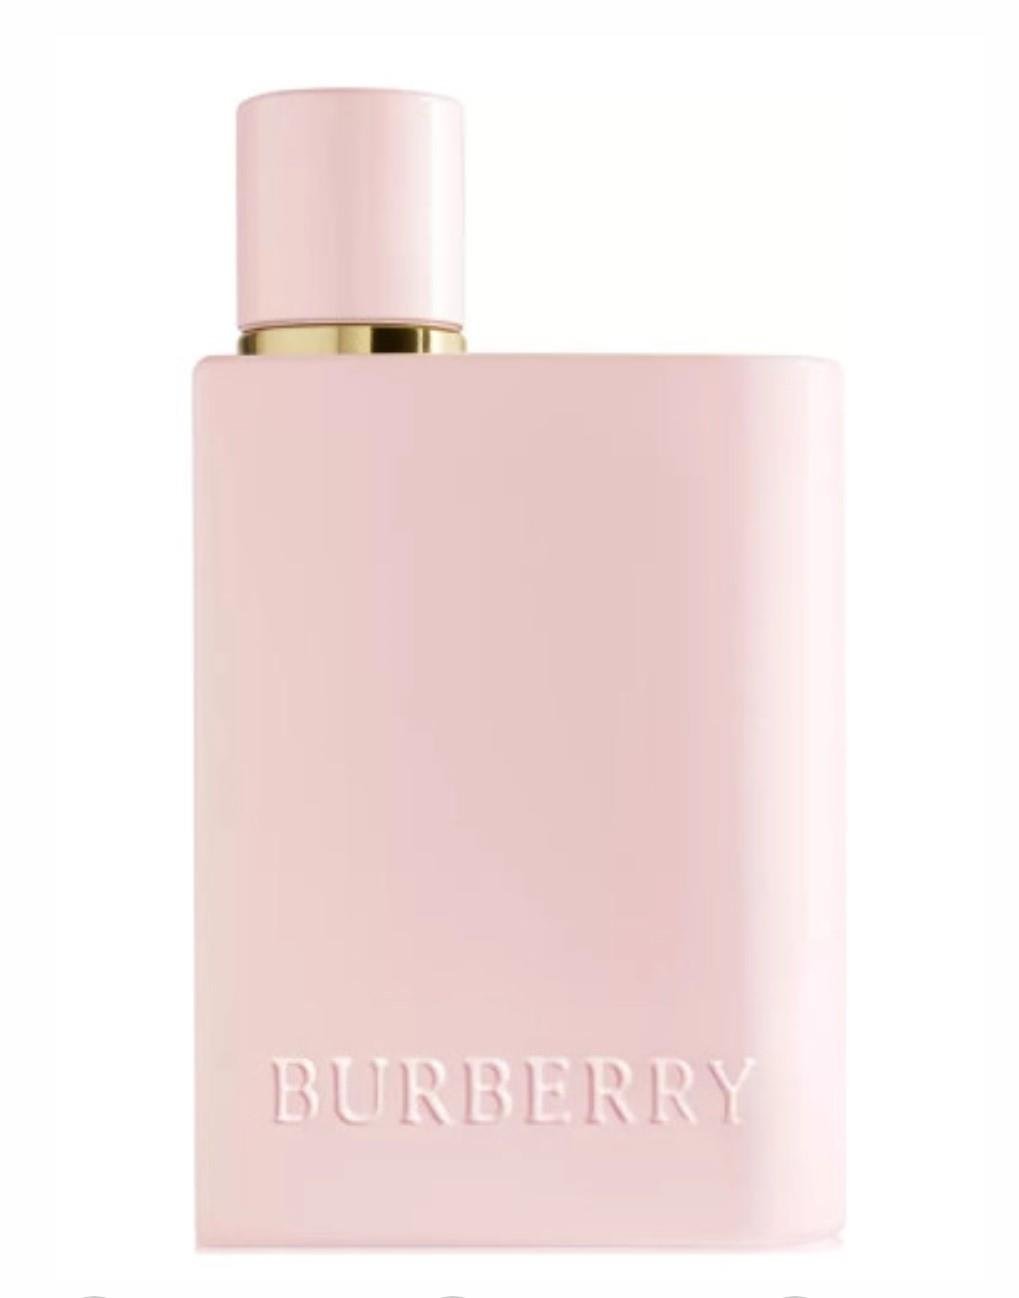 Burberry - and - Fragrances Decanted Buy Samples The Perfume Perfumed Court Elixir EdP Her